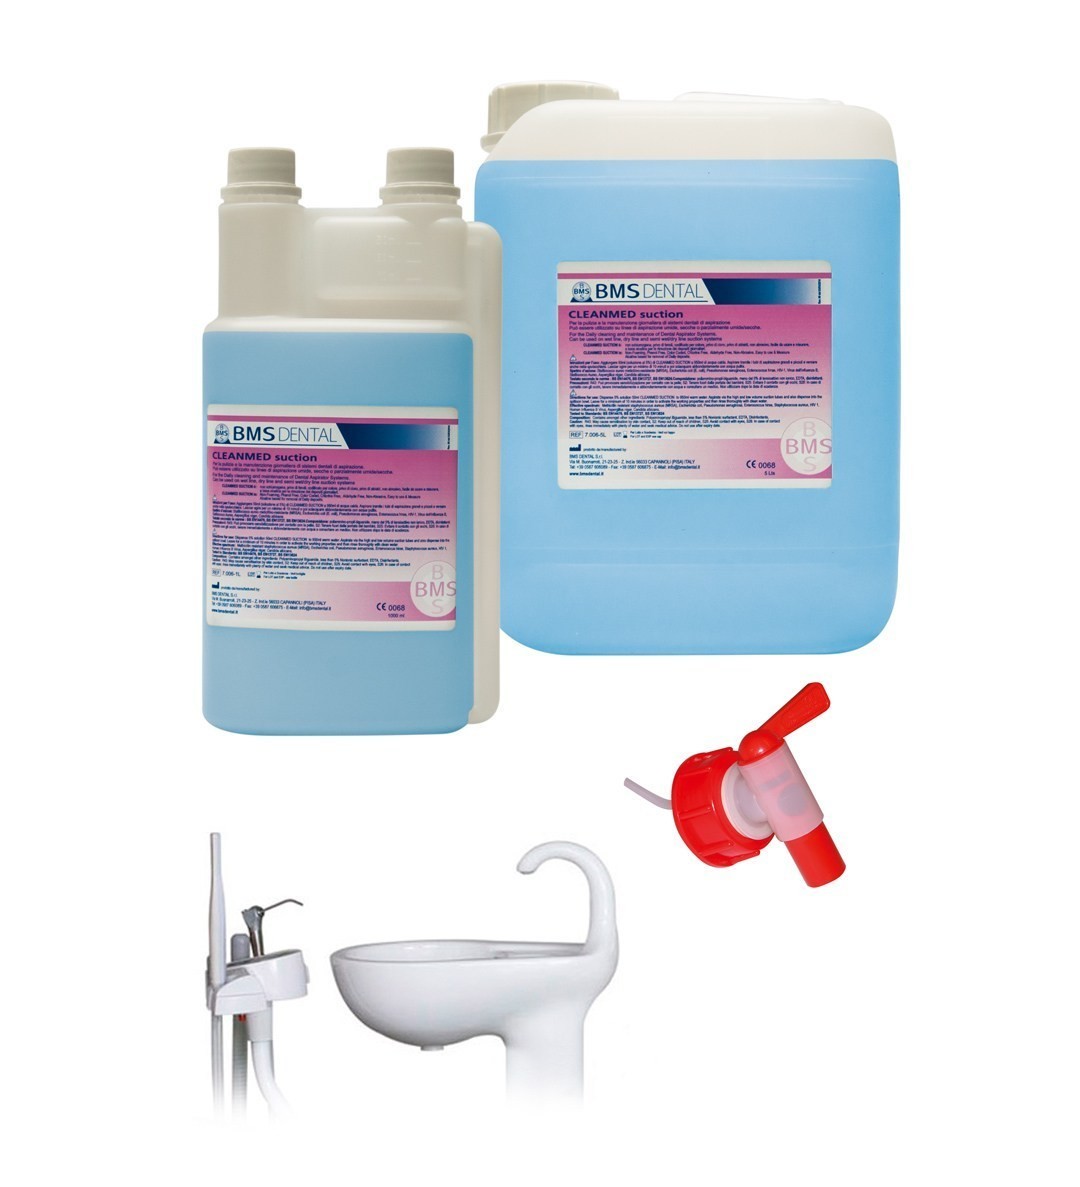 Cleanmed Suction 1L